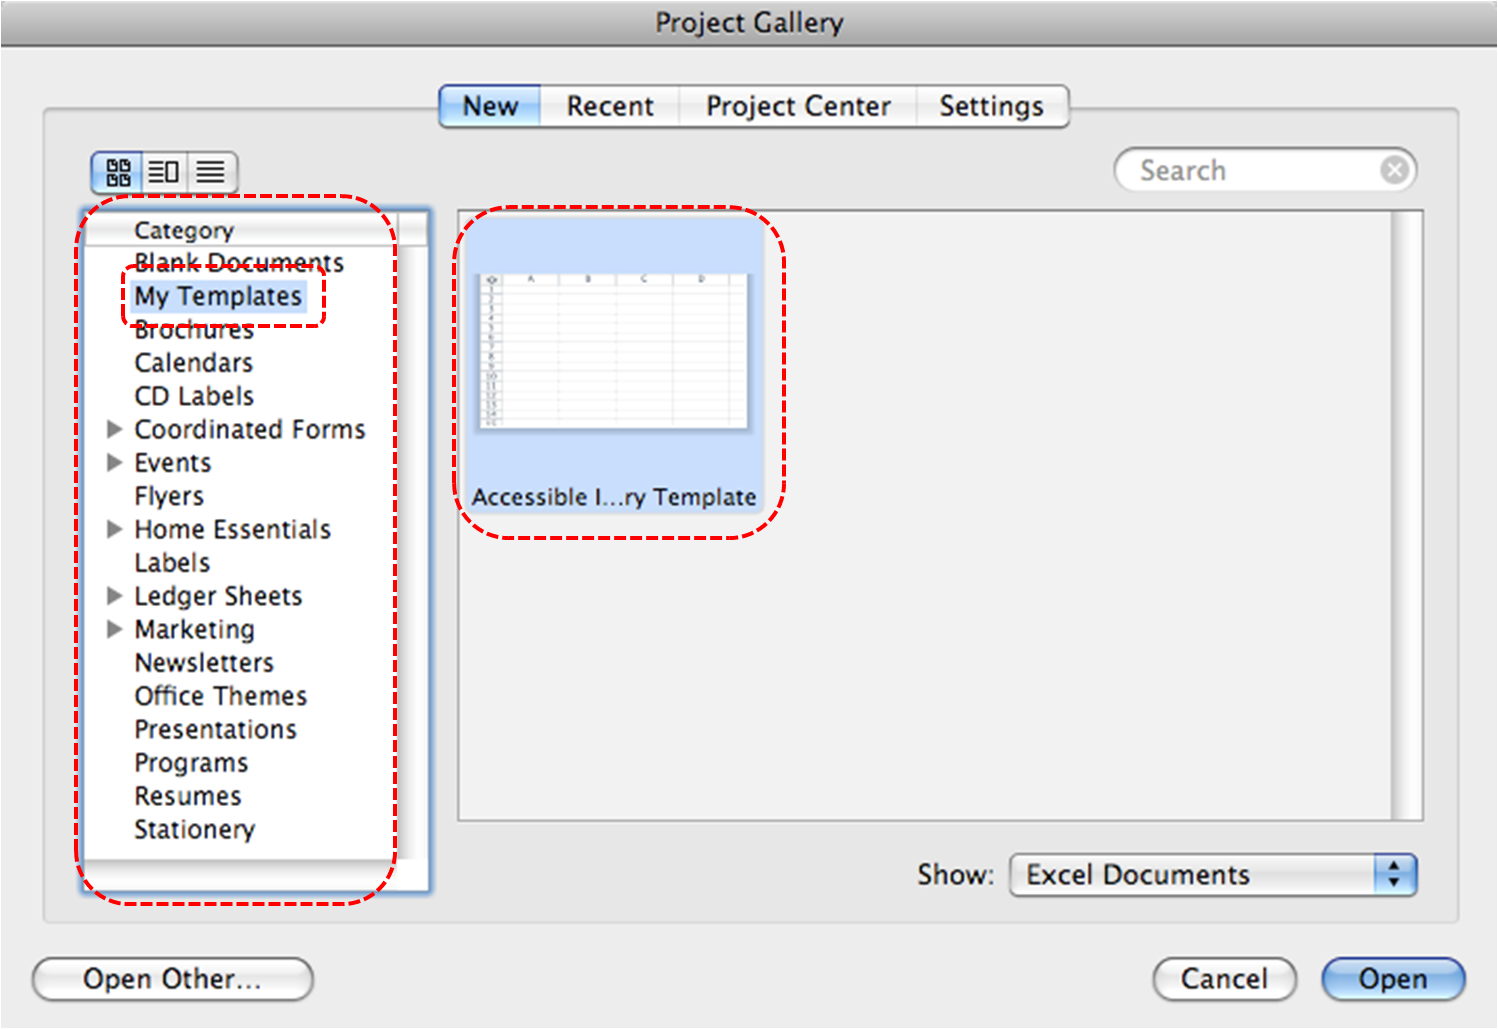 Image demonstrates location of My Templates option in Category section and an accessible template in the tempkate gallery of the Project Gallery dialog.